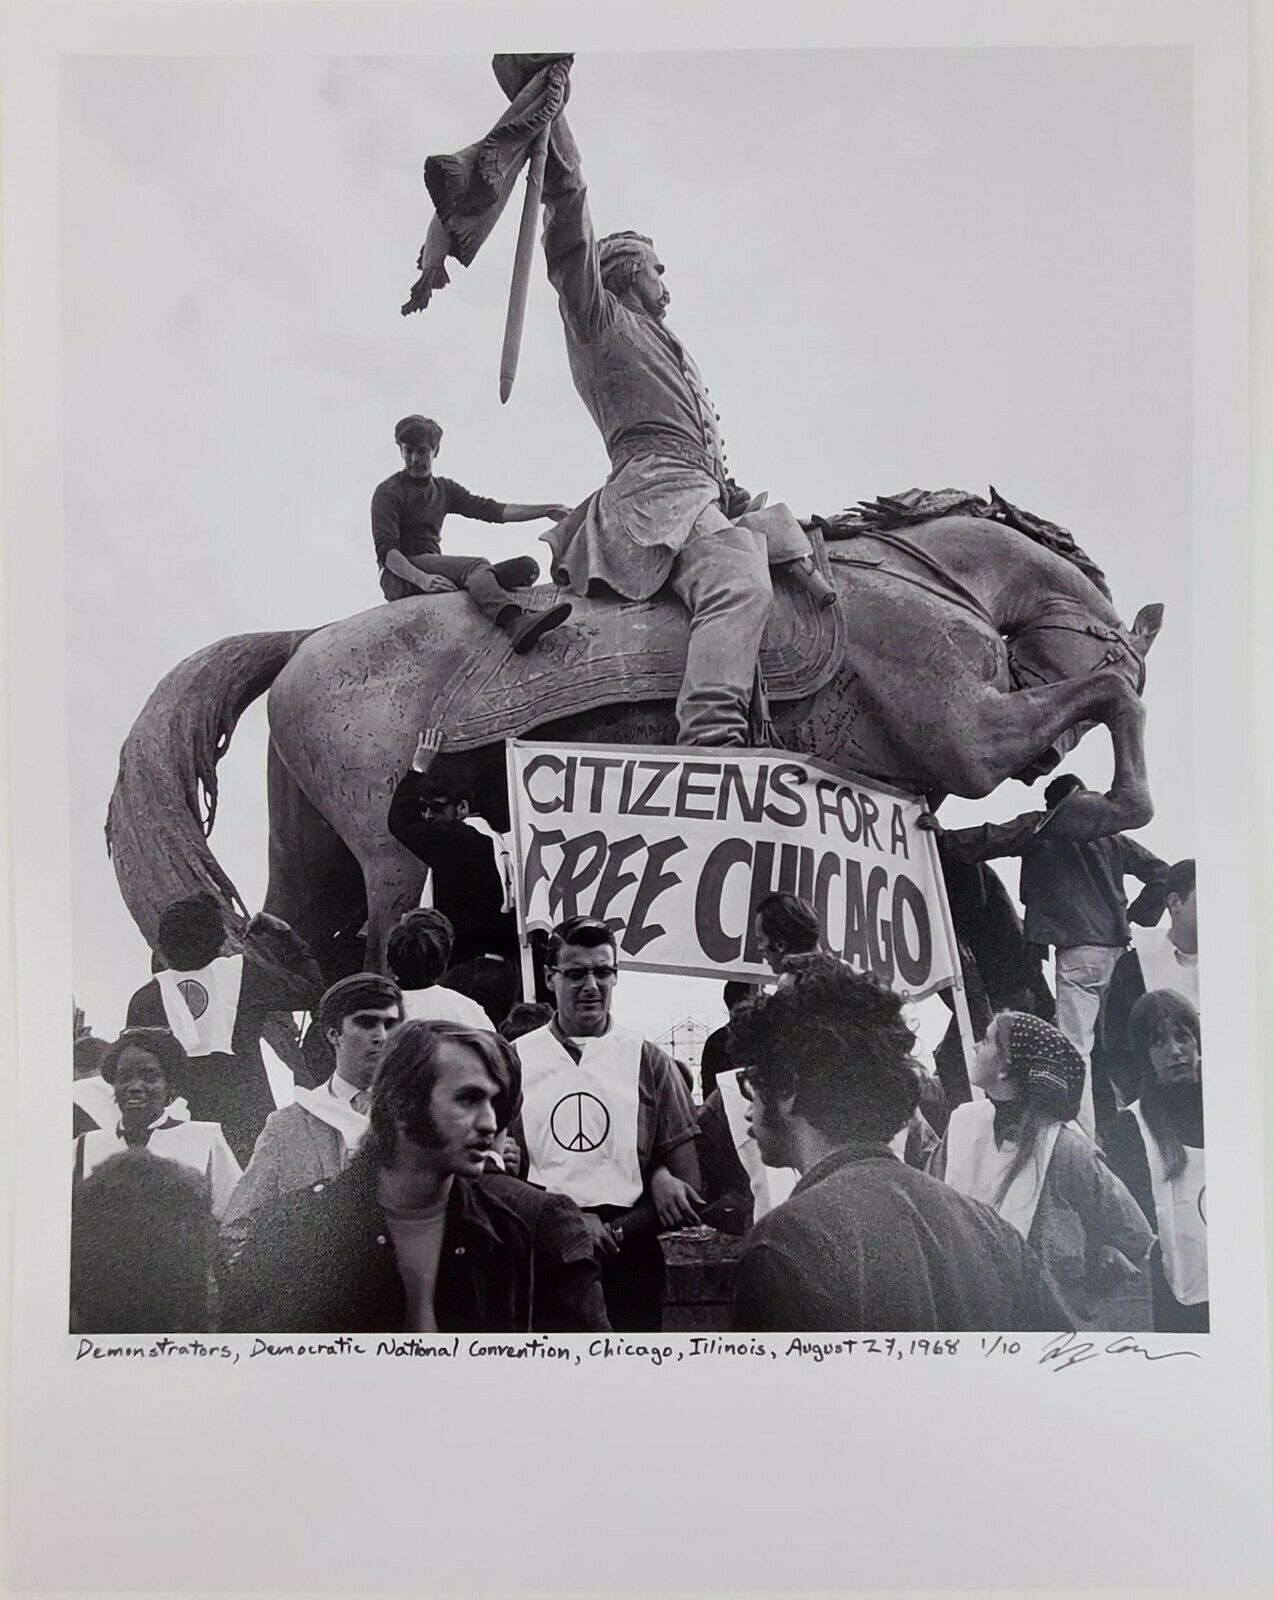 1348331 Demonstrators at the Democratic National Convention in Chicago, Illinois. August 27, 1968. Jerry Aronson.